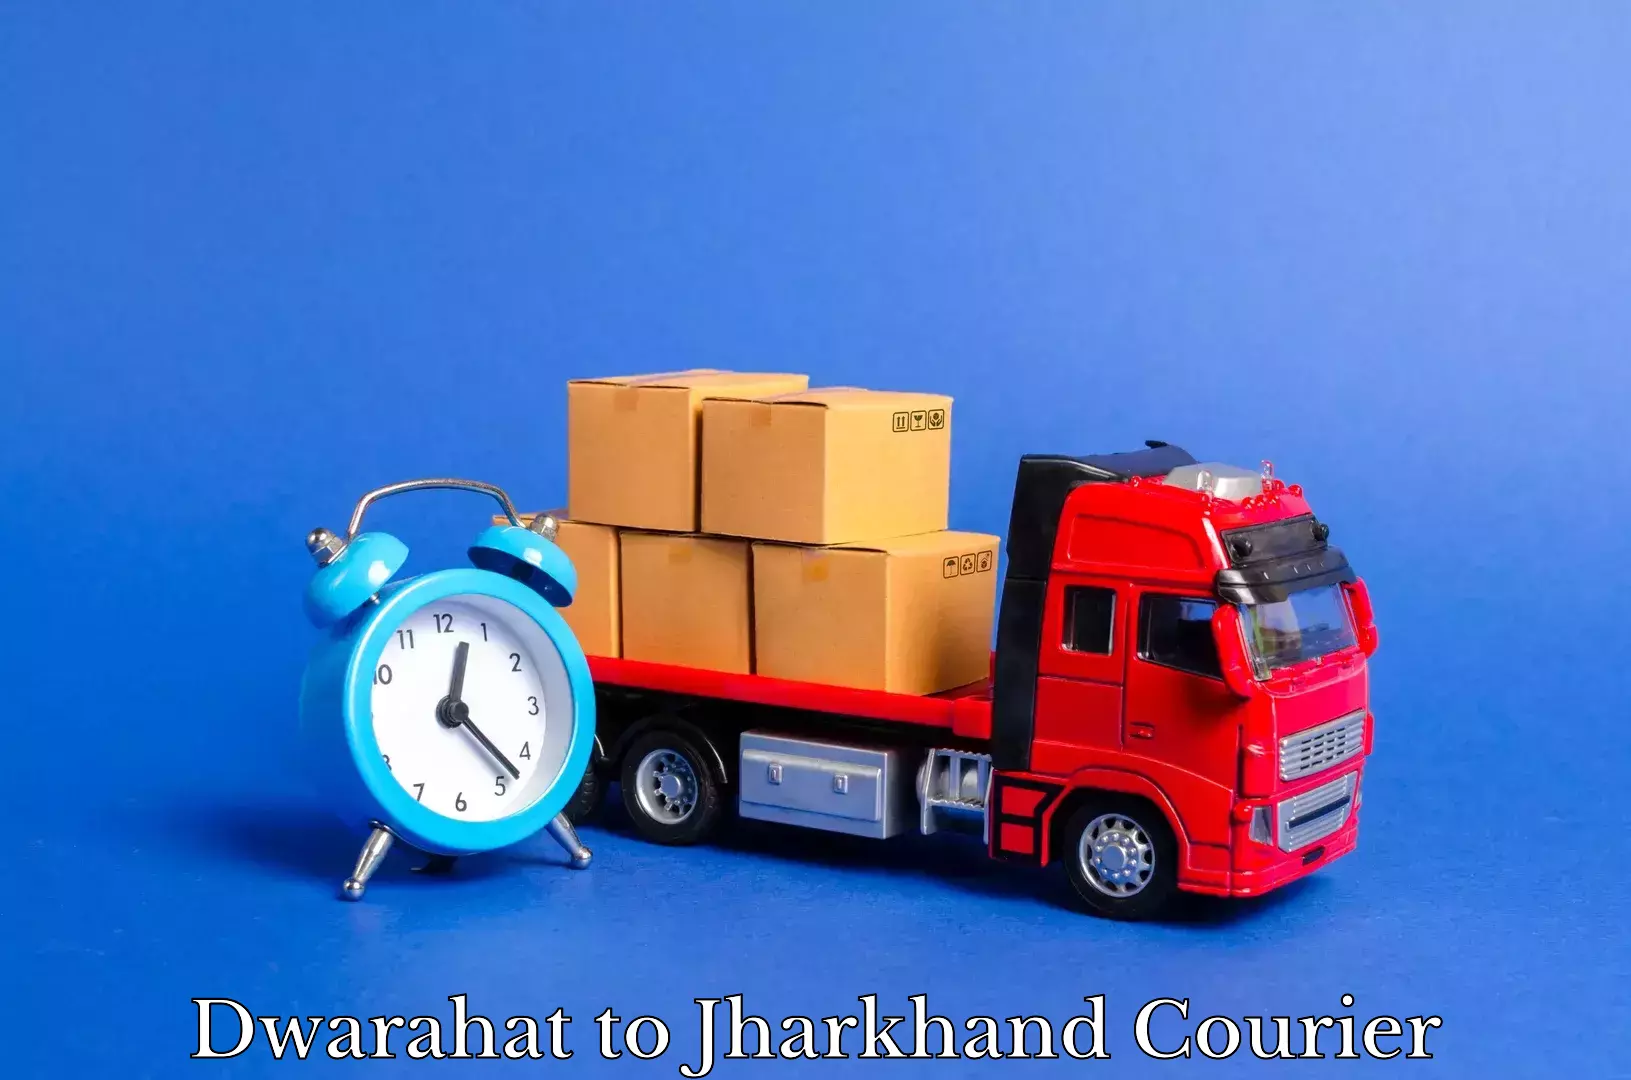 Furniture delivery service in Dwarahat to Bero Ranchi